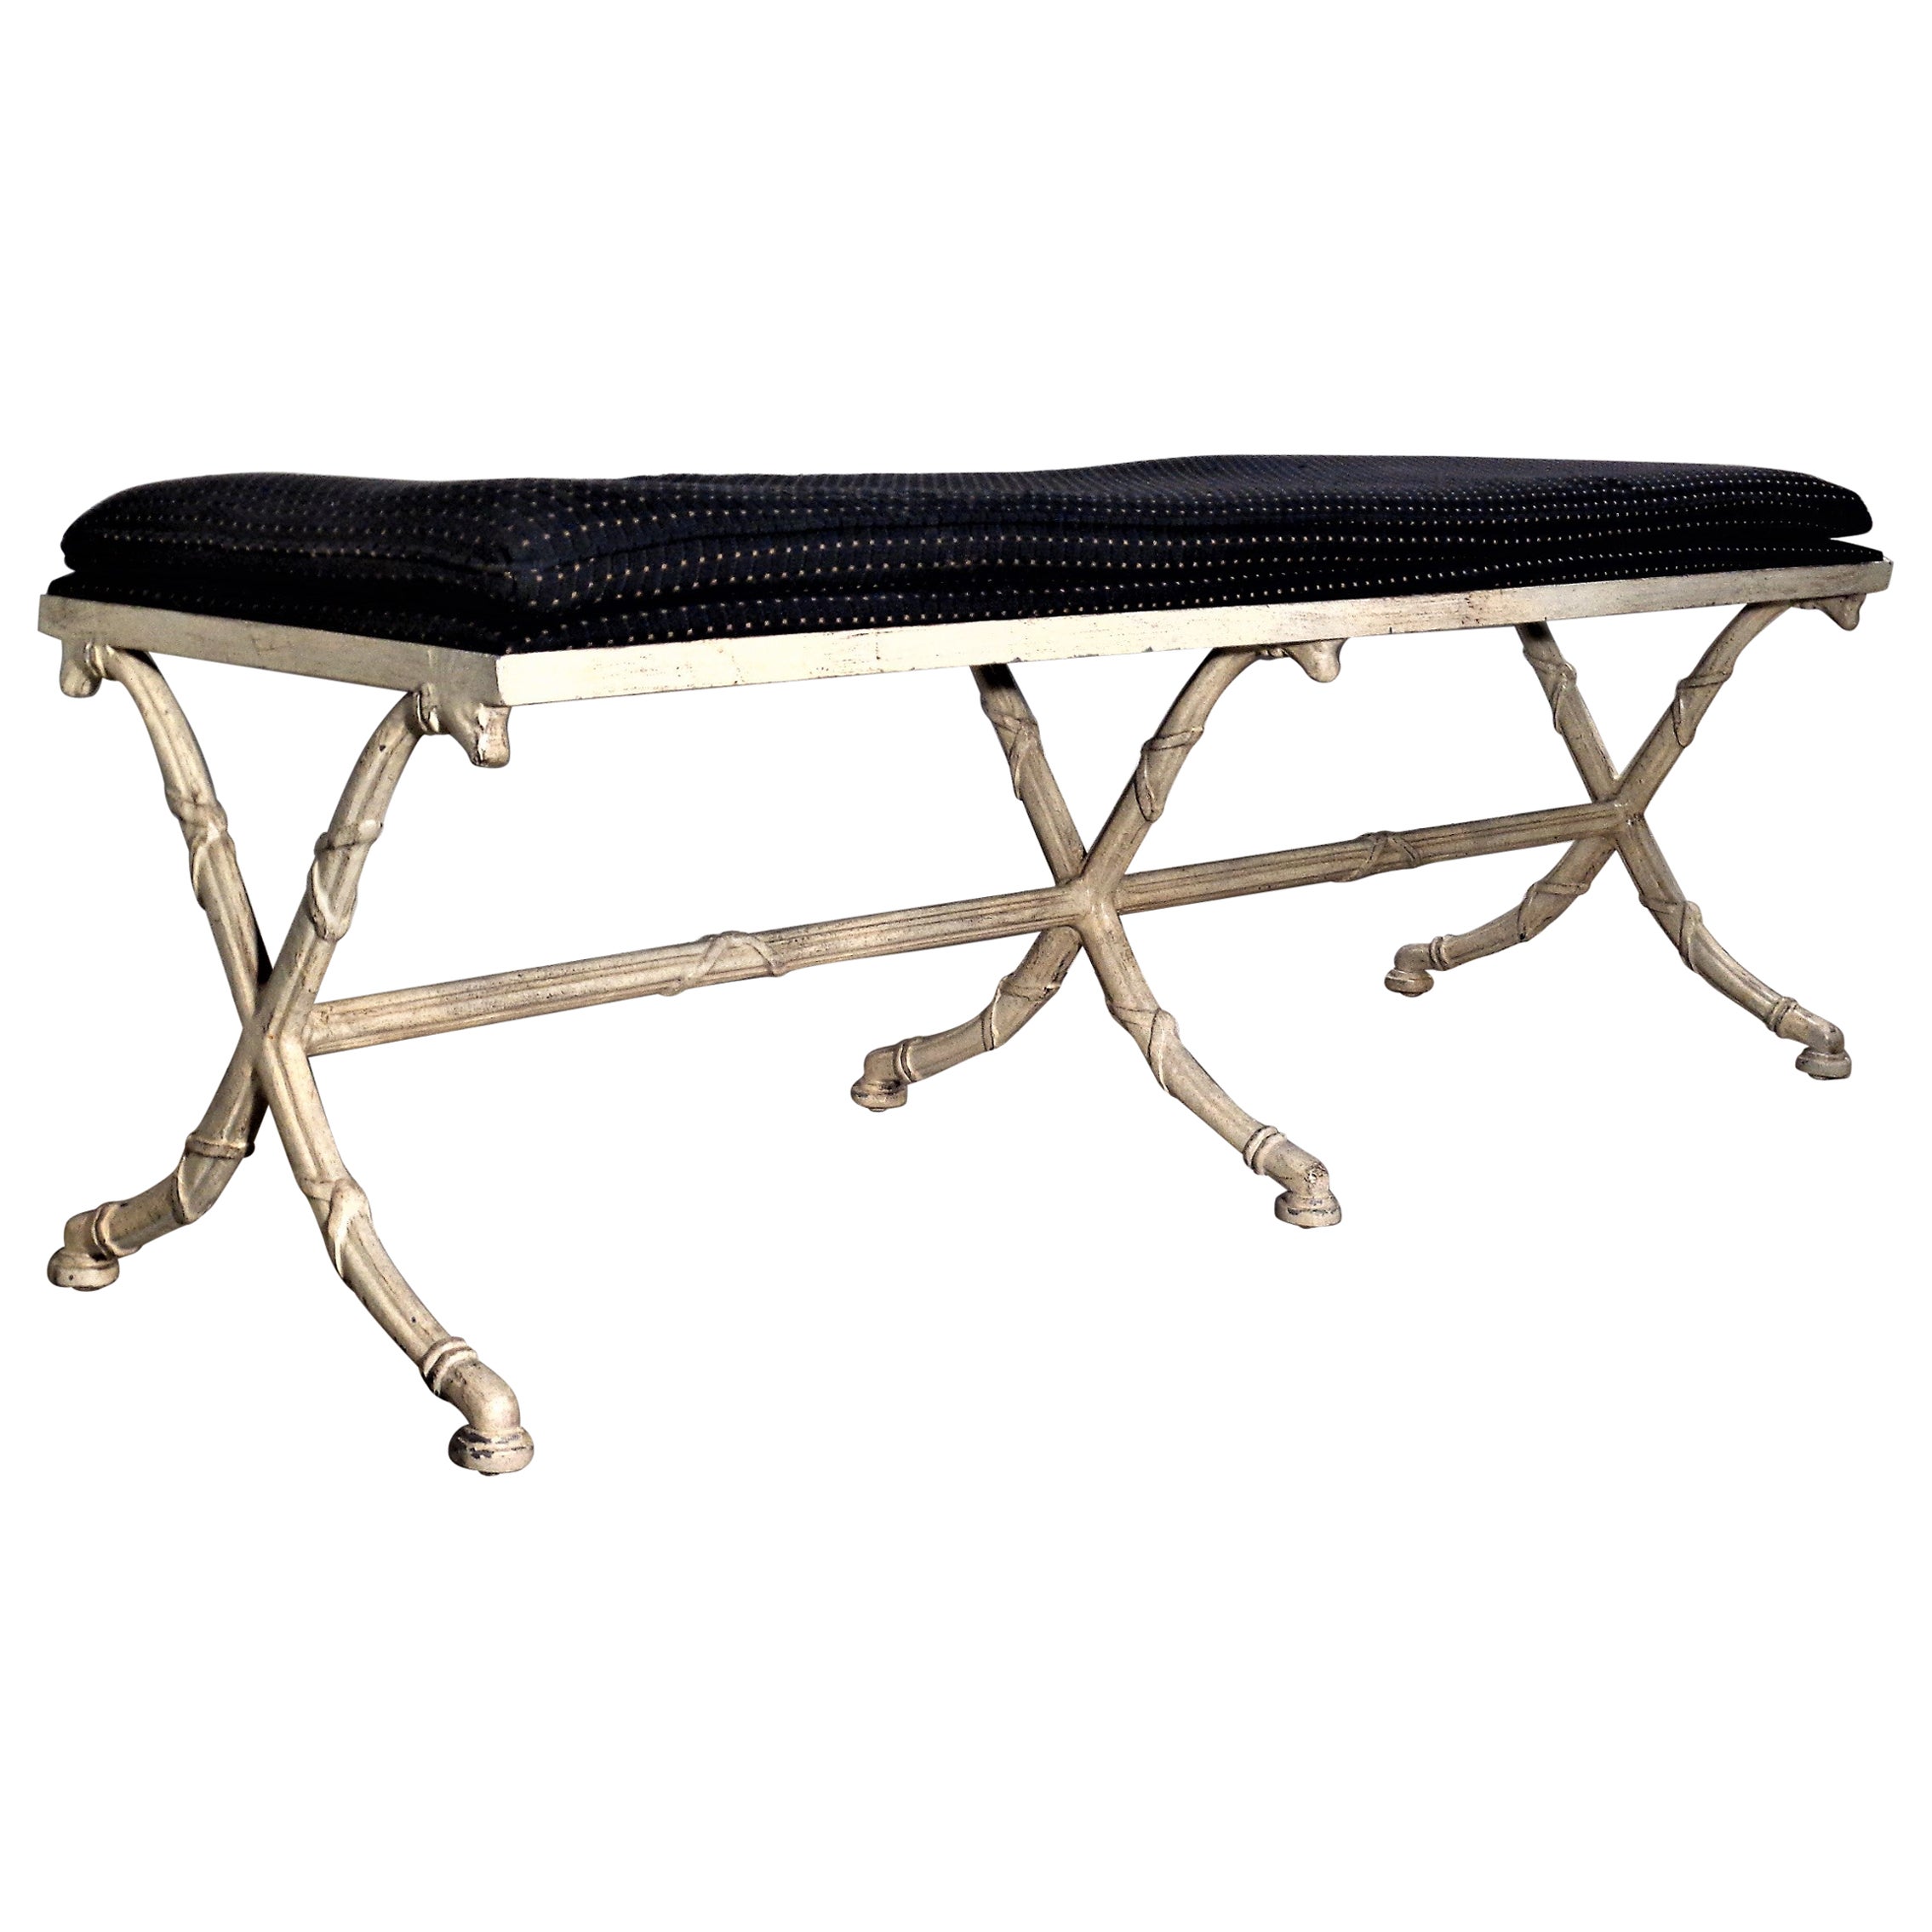  Dorothy Draper Style Neoclassical Long Metal Bench